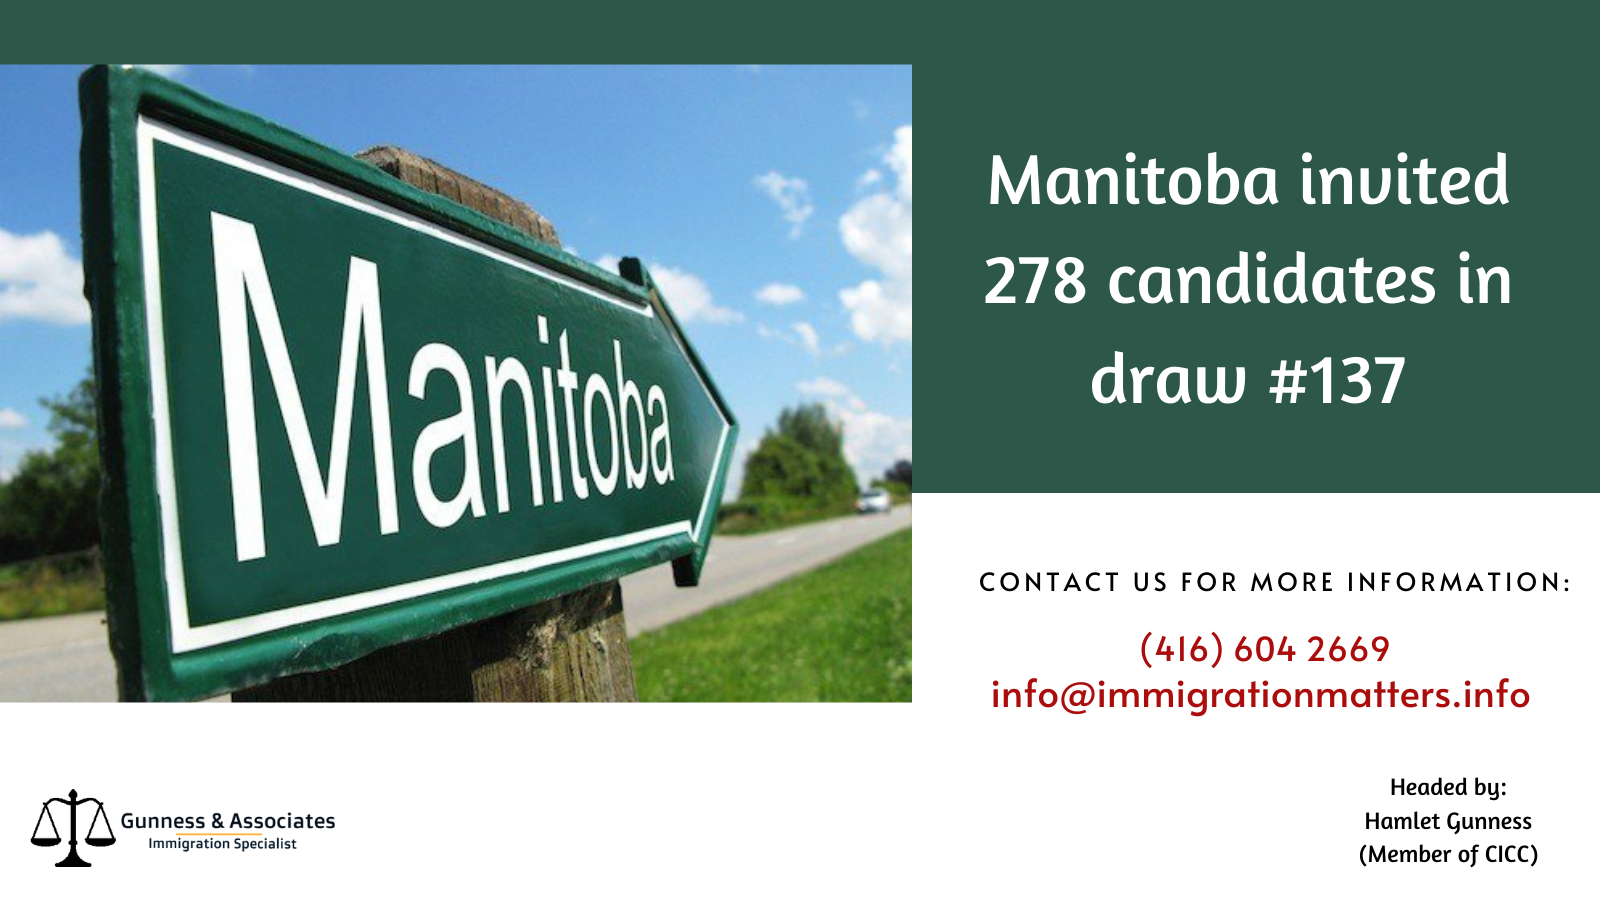 Manitoba invited 278 candidates in draw #137